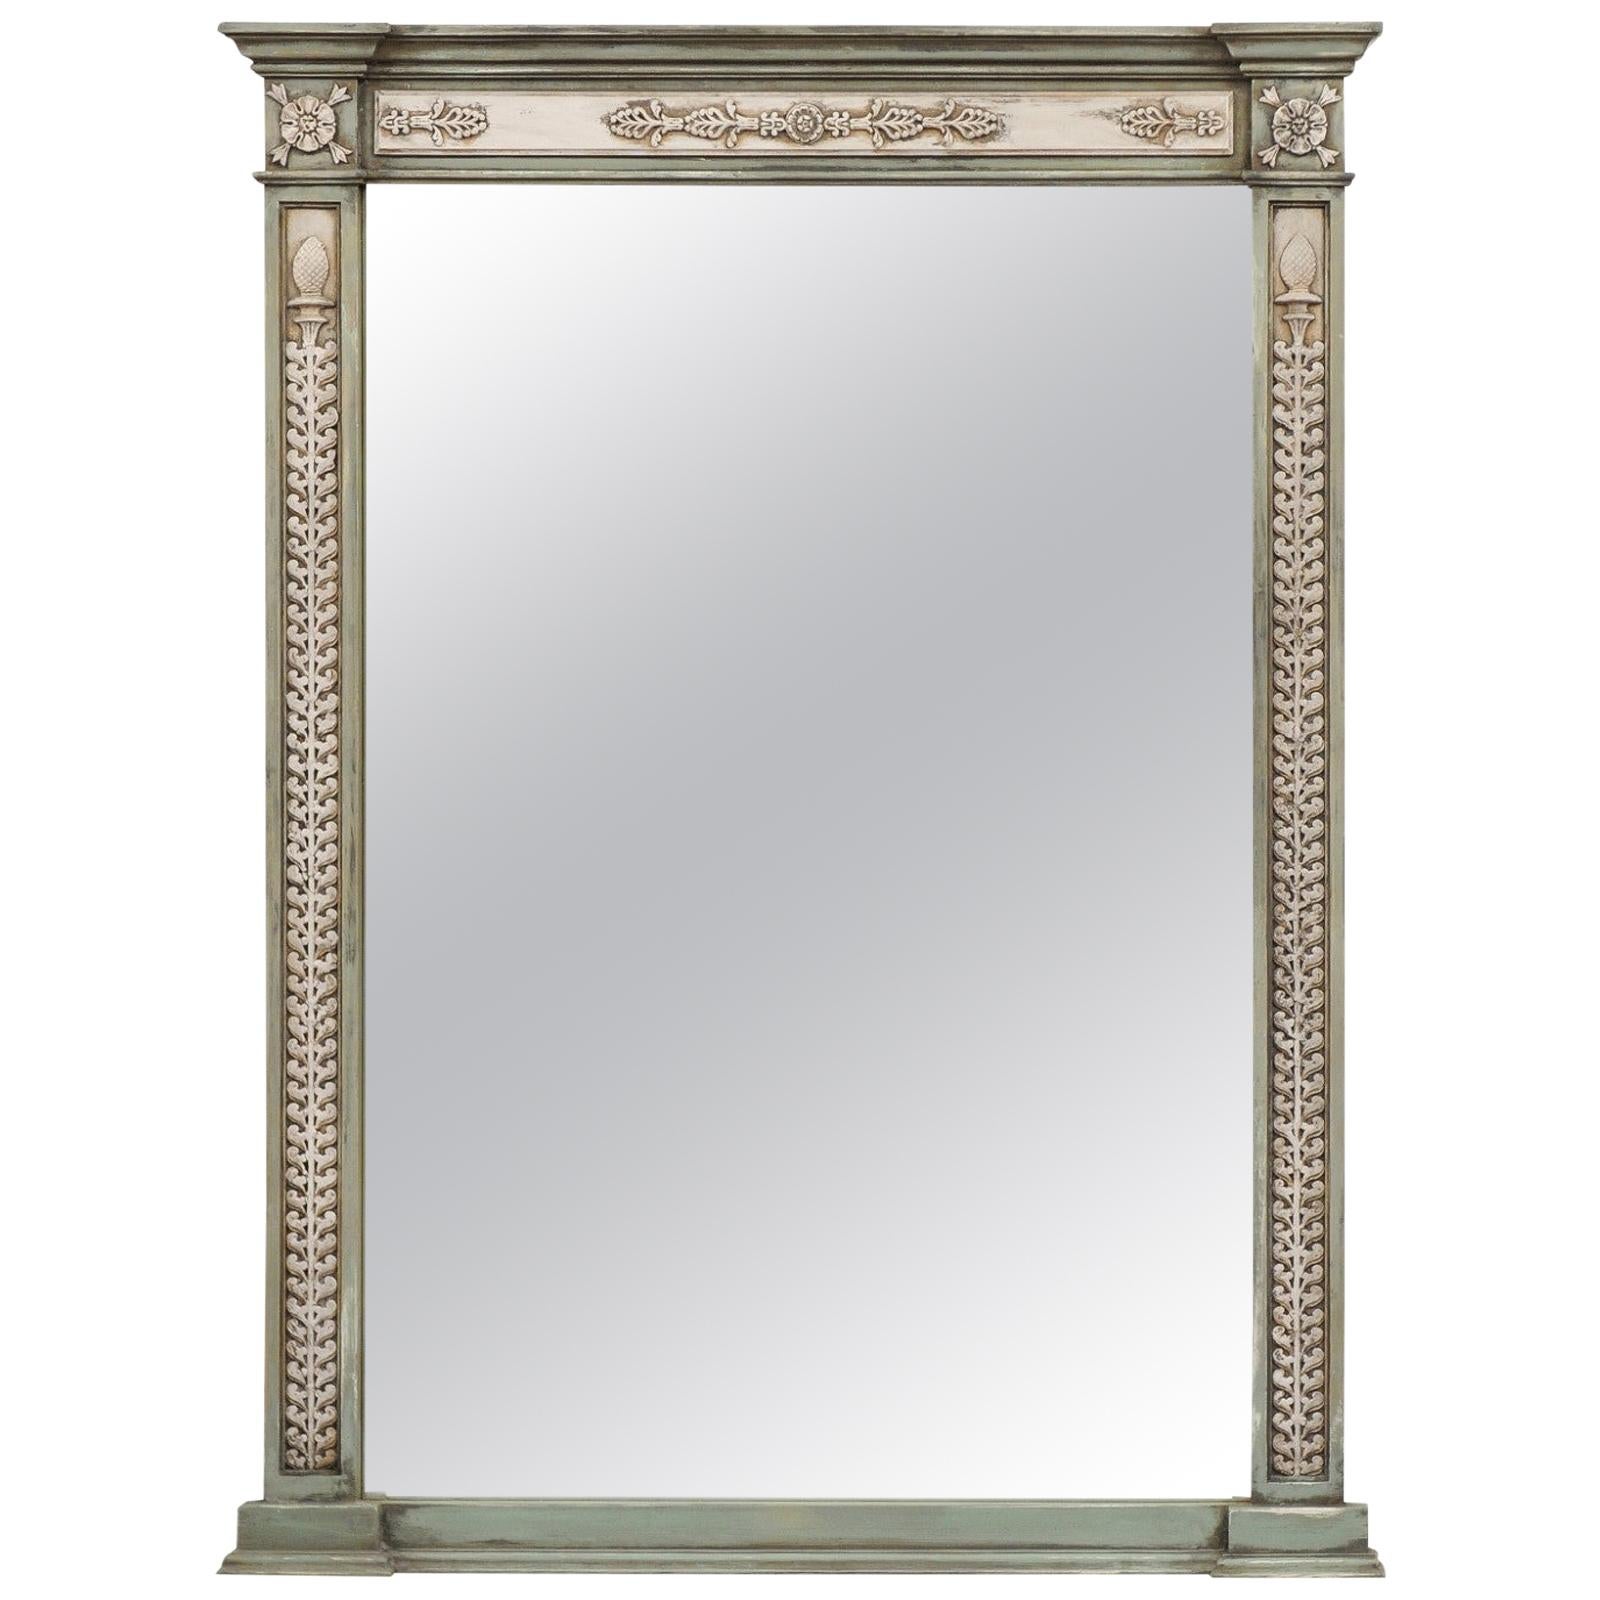 Neoclassical Style Mirror Made from 1750s French Door Frames with Carved Decor For Sale